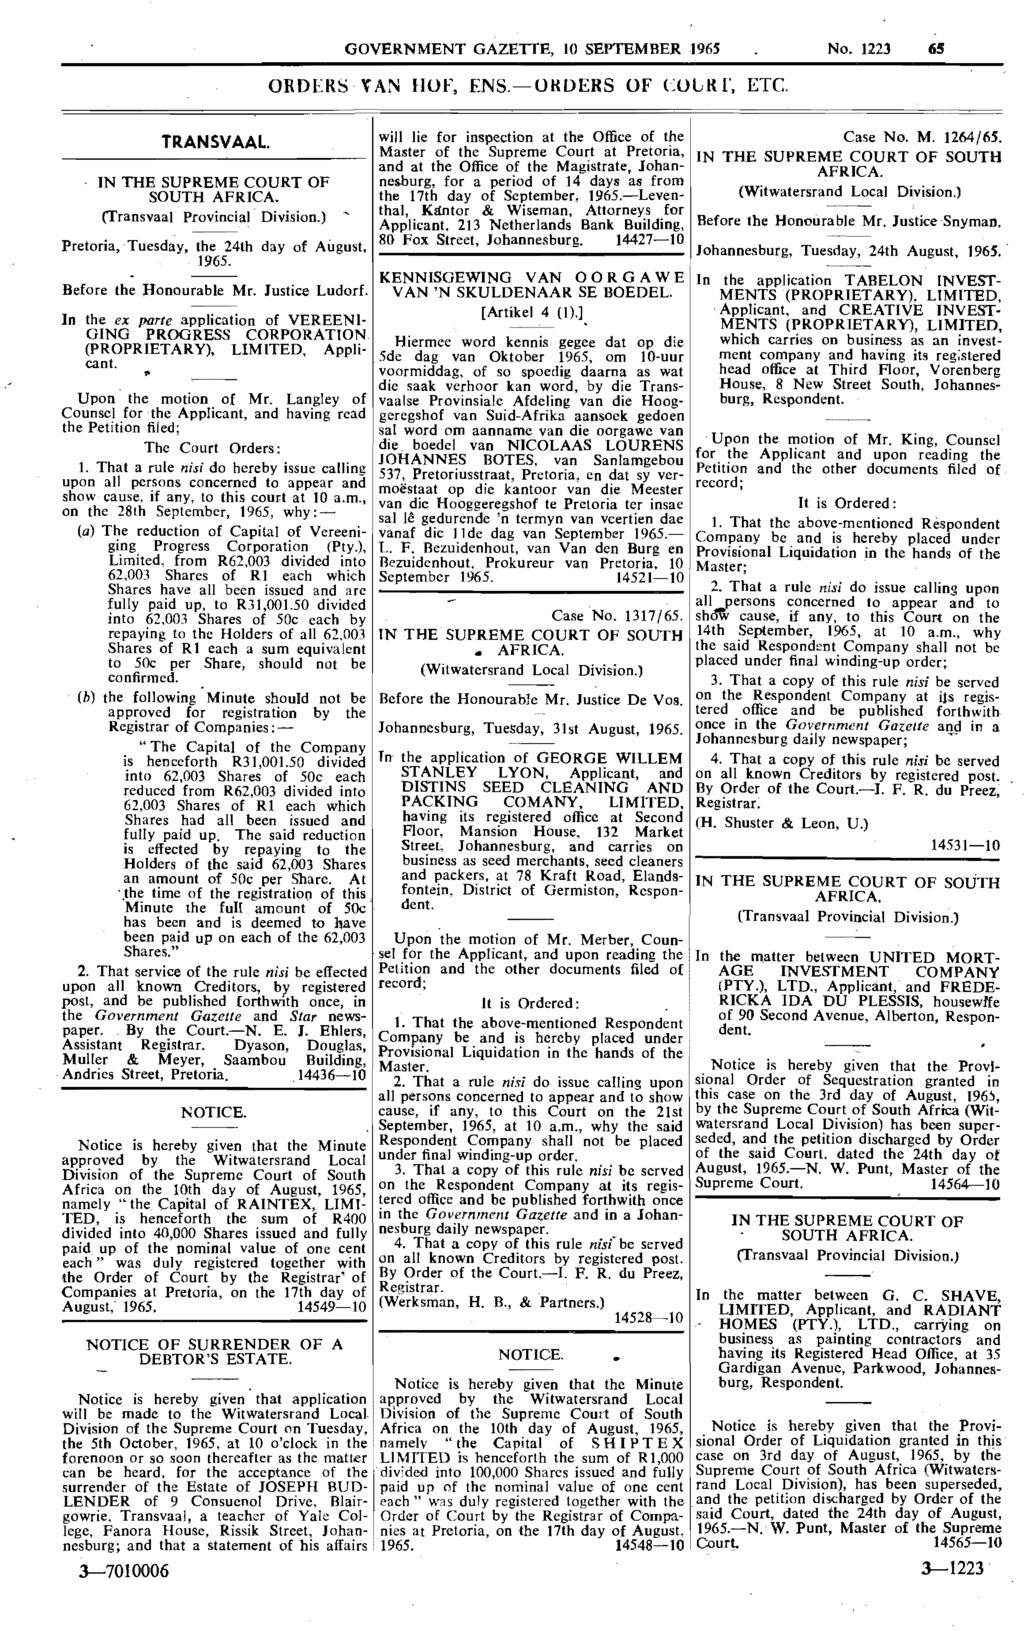 GOVERNMENT GAZETTE, 10 SEPTEMBER 1965 1223 65 ORDERS TAN HOI". ENS.-OI{OERS OF COLI{ r, ETC. =============-=-==========================...~- TRANSVAAL.